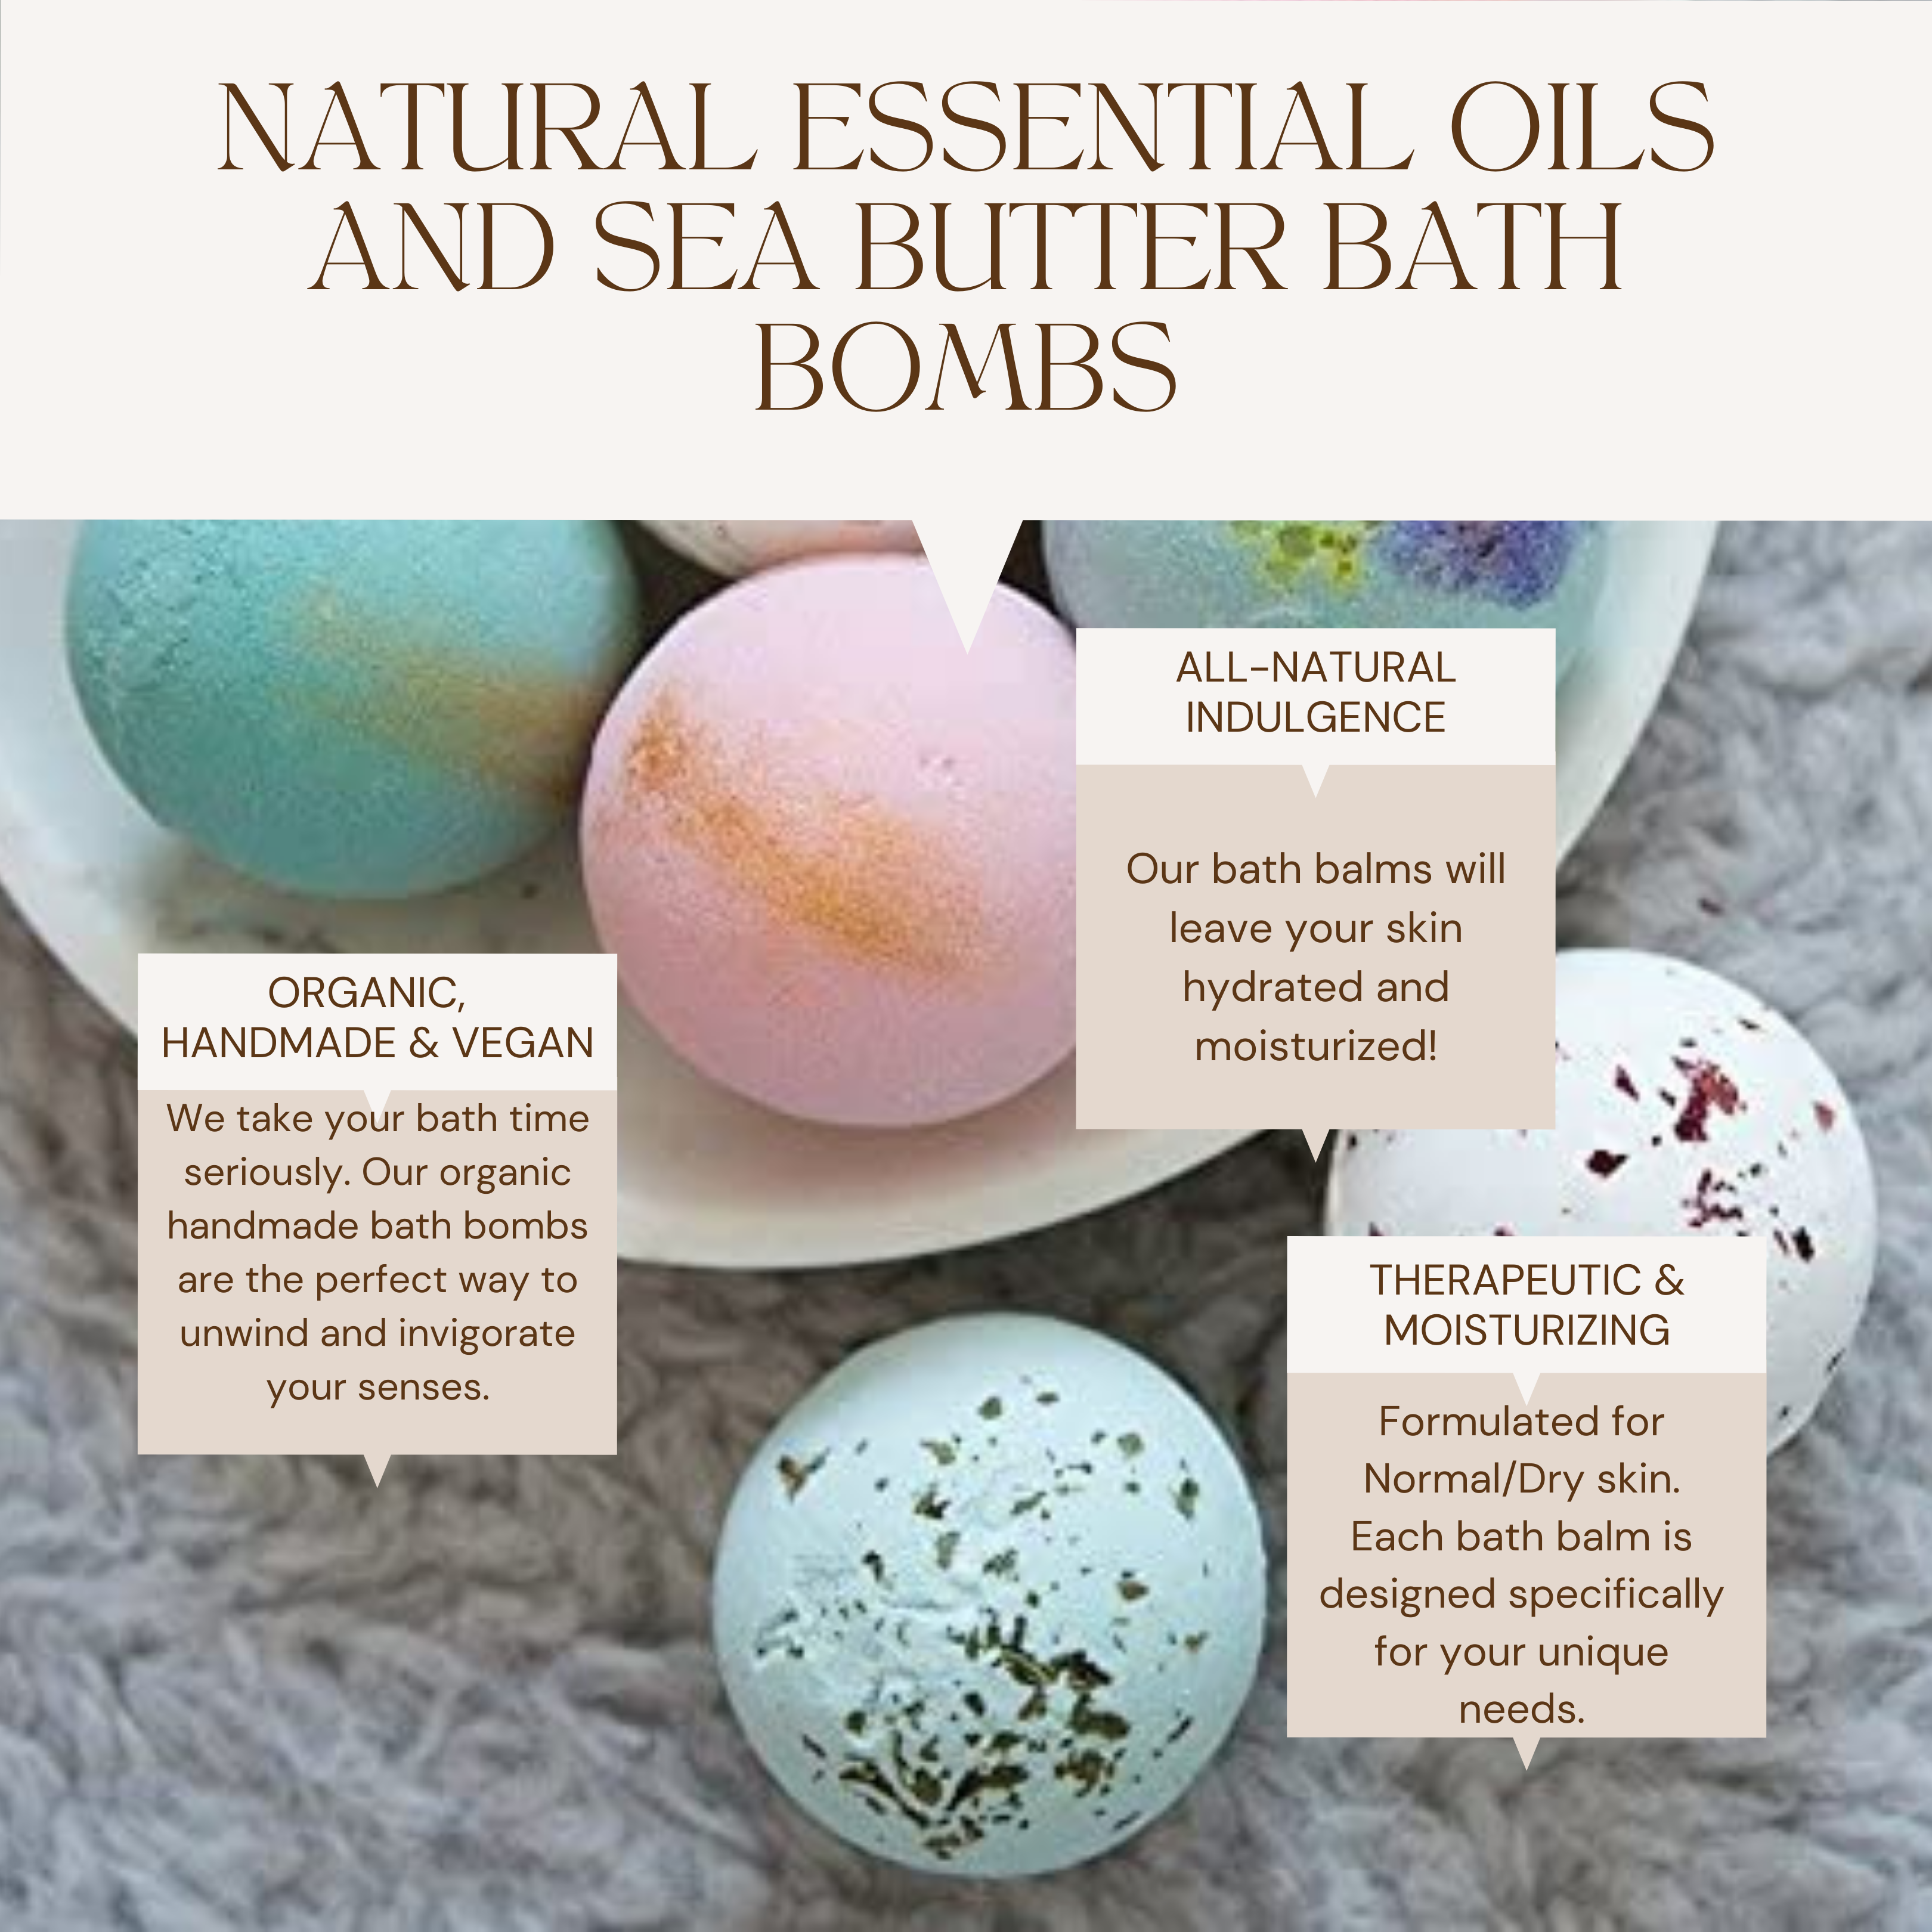 Organic hand made with Essential Oils and Shea Butter 9 pc set Bath Bombs